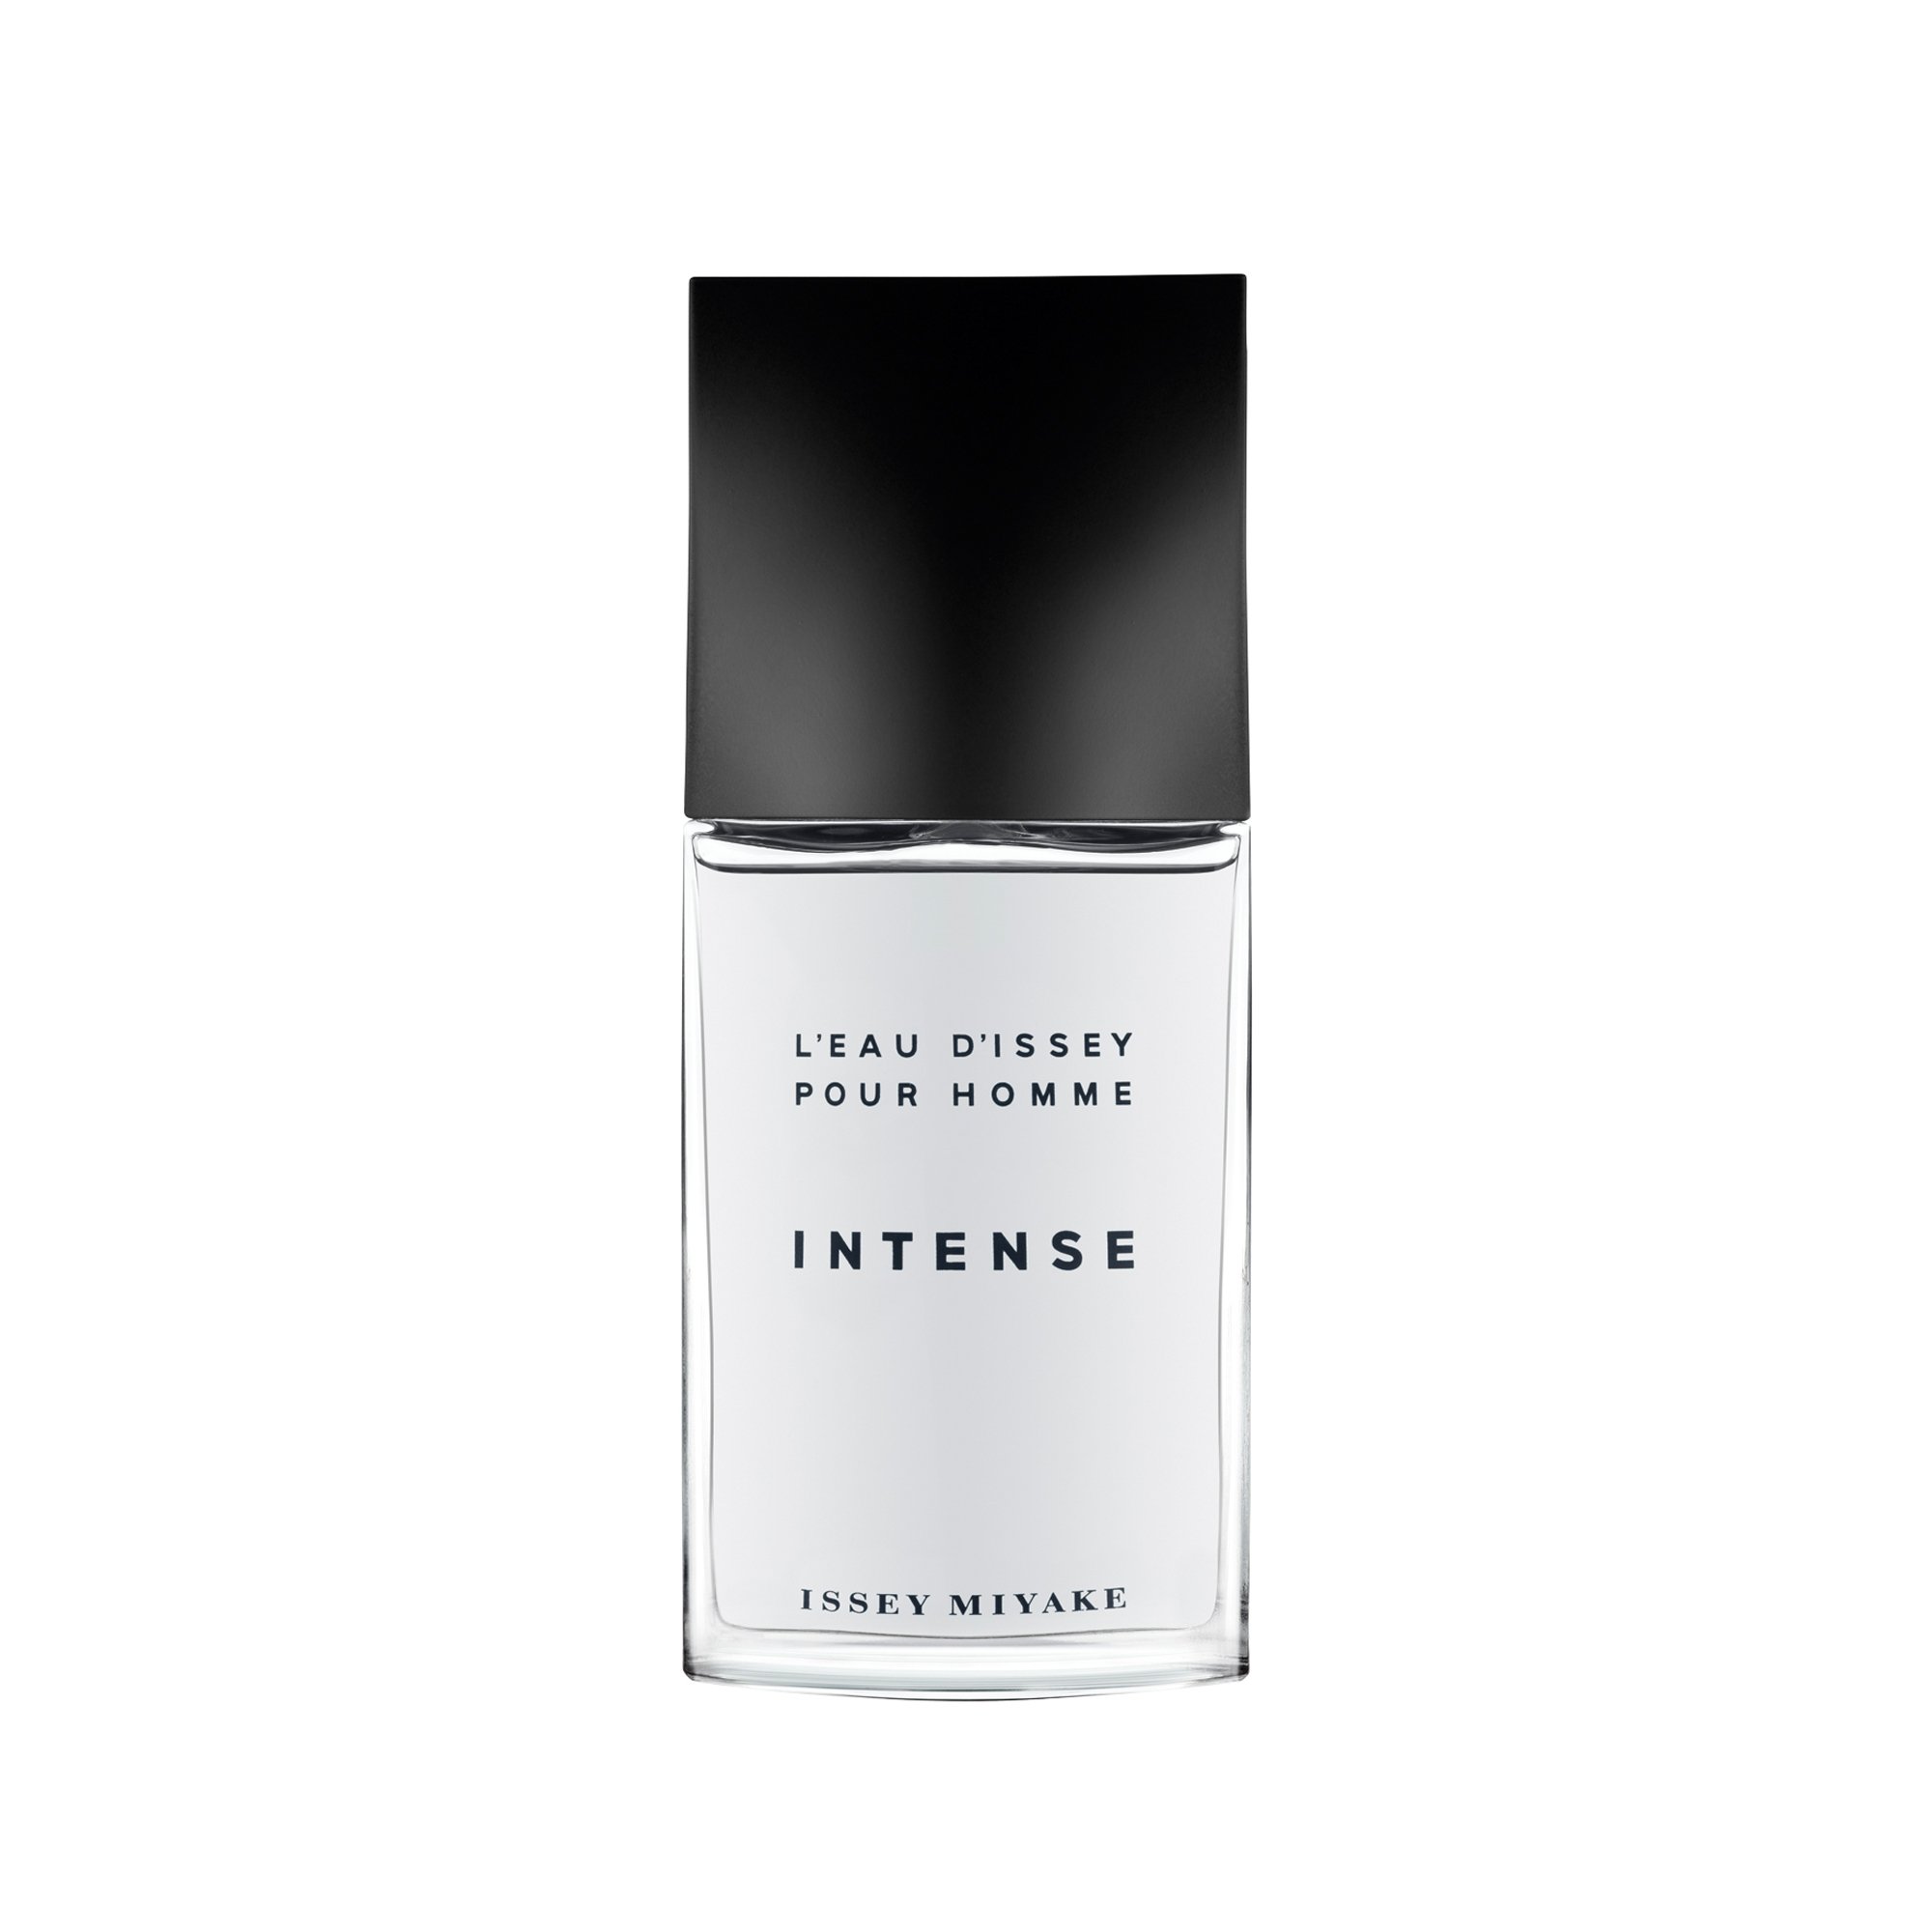 Issey Miyake L'eau d'Issey Intense by Issey Miyake TESTER for Men Eau De Toilette Spray 4.2 oz